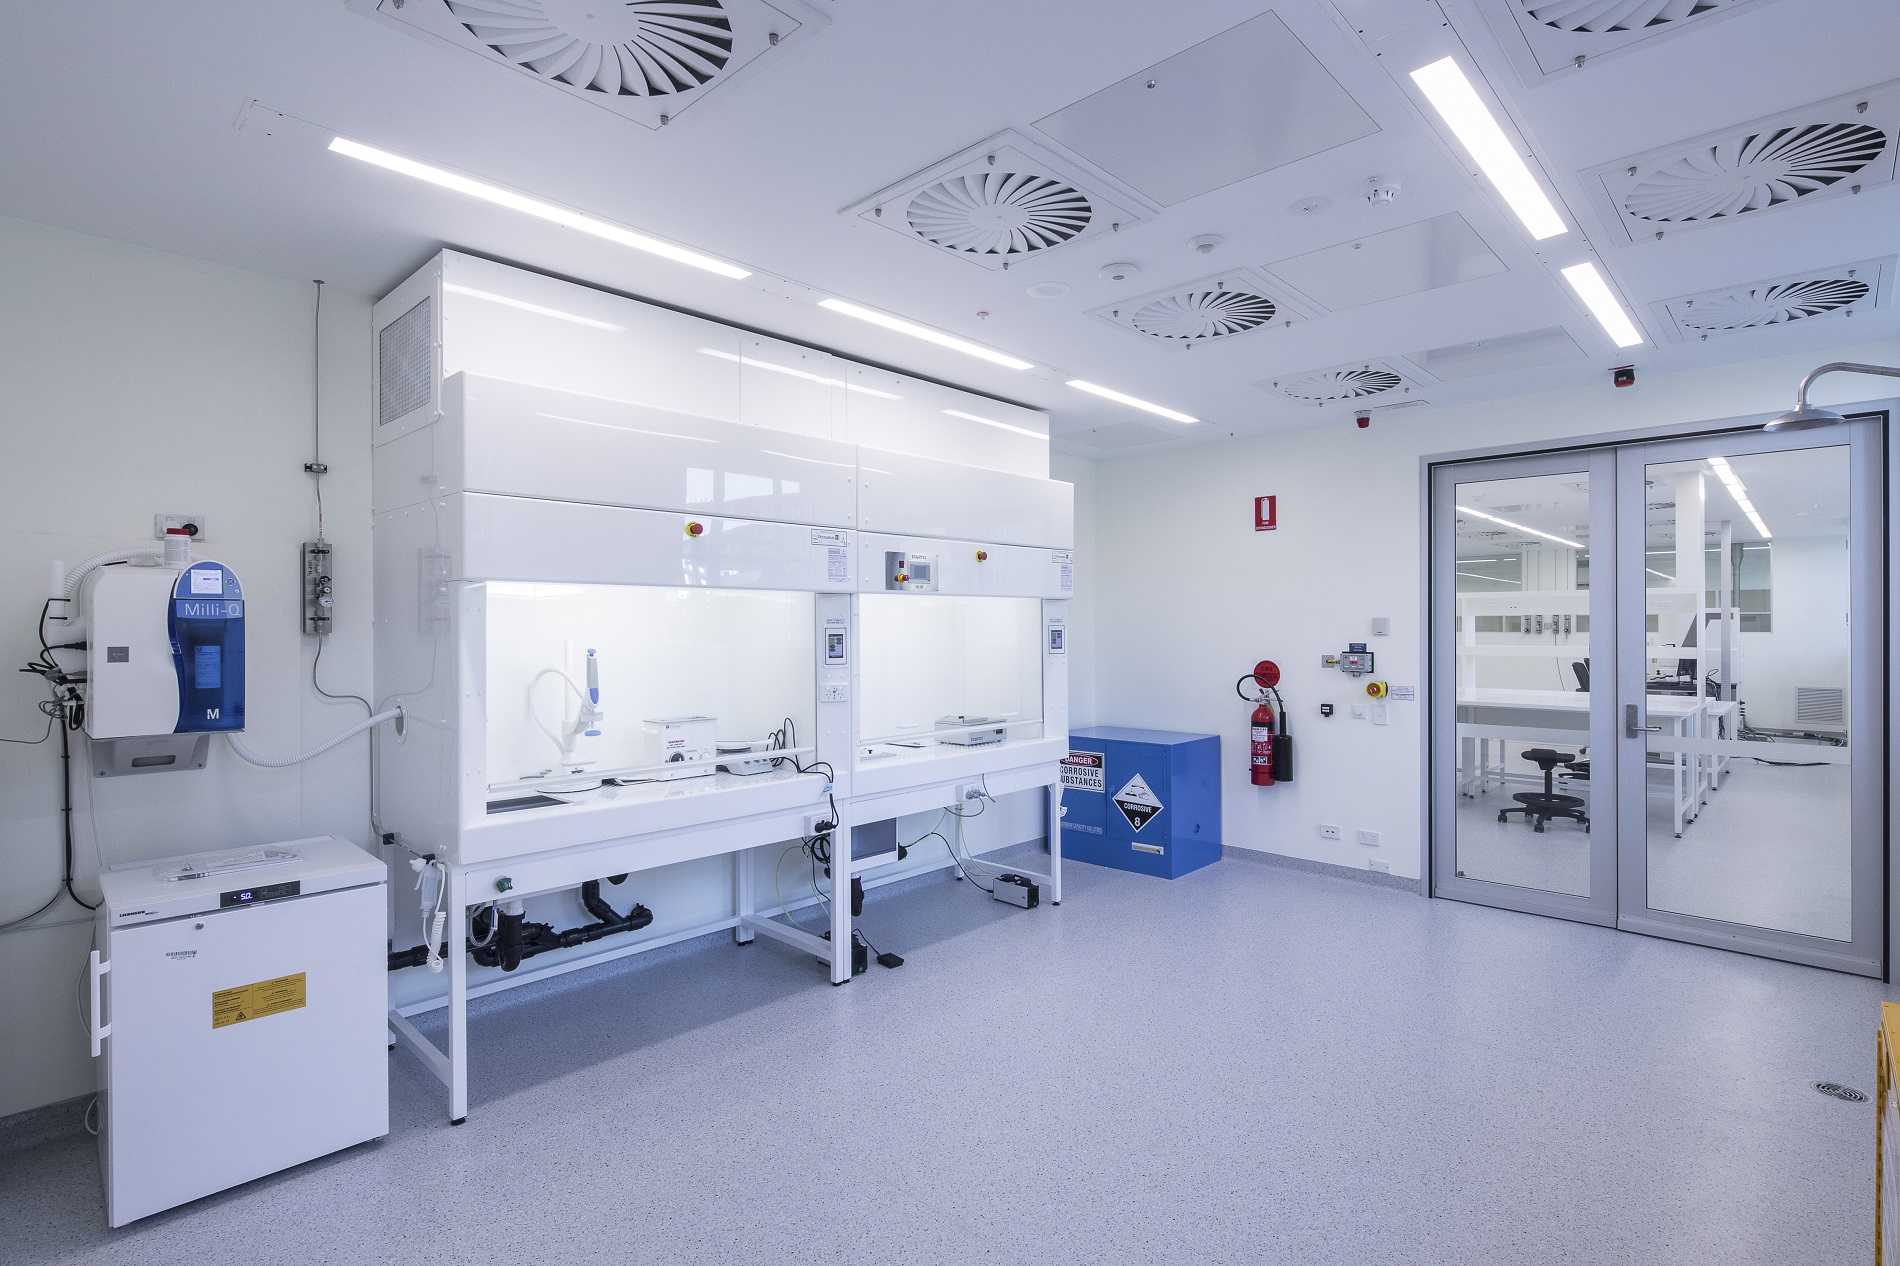 One of the new UNSW laboratories that will be used for the company’s research